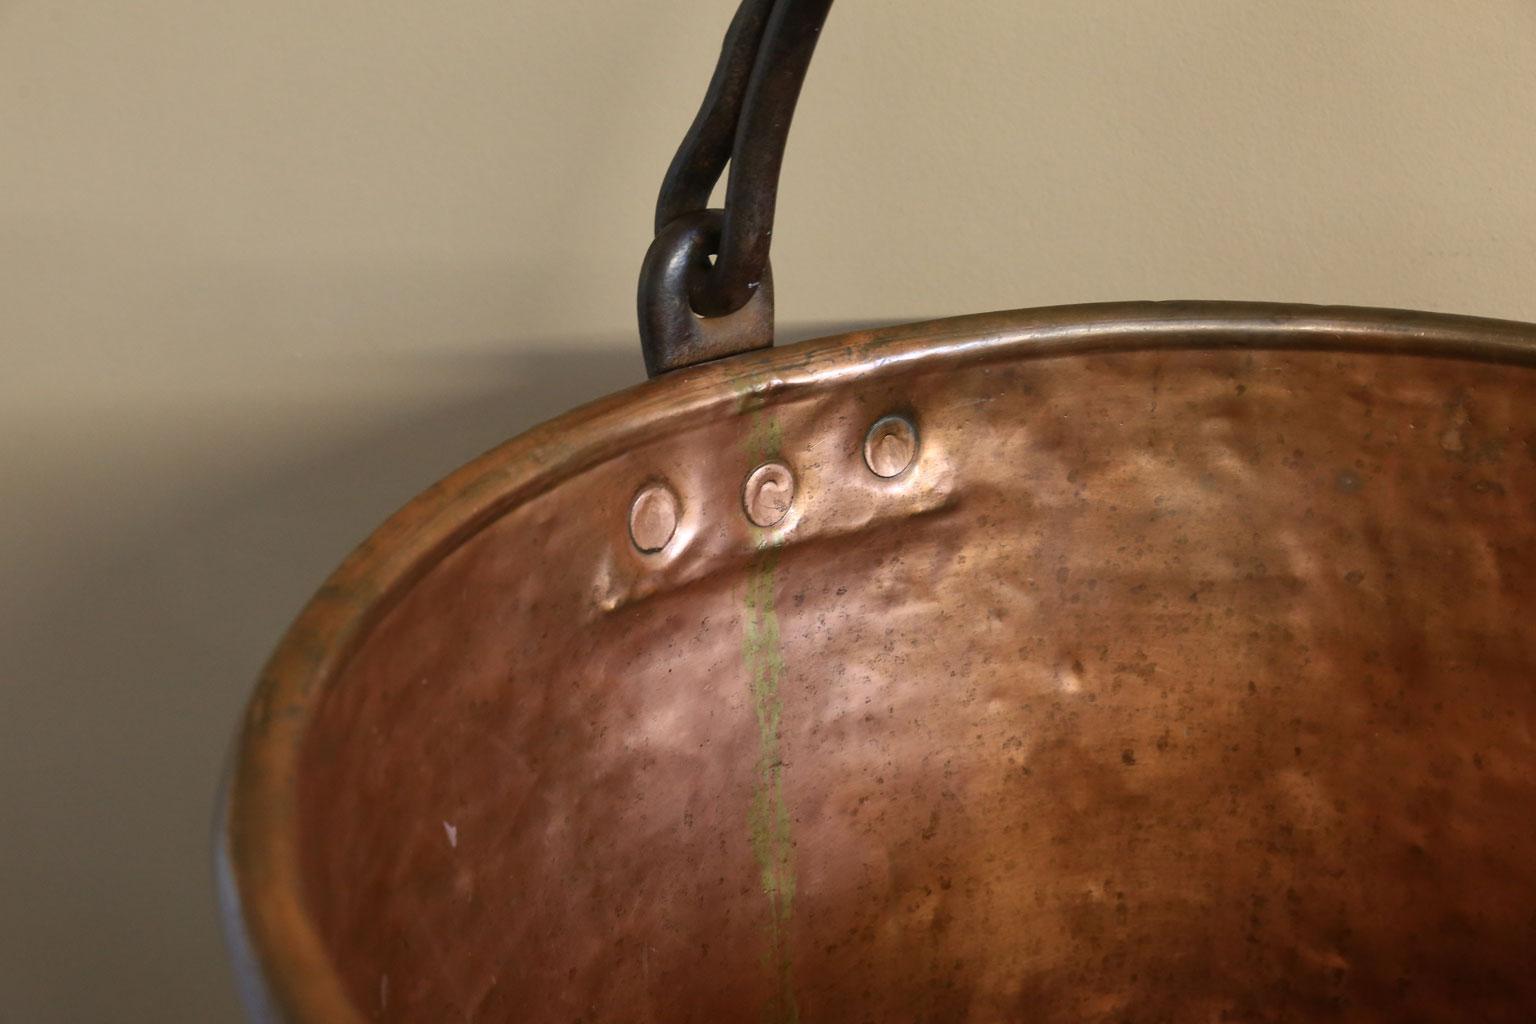 American Antique, Handmade Copper Apple Butter Kettle with Forged Iron Handle